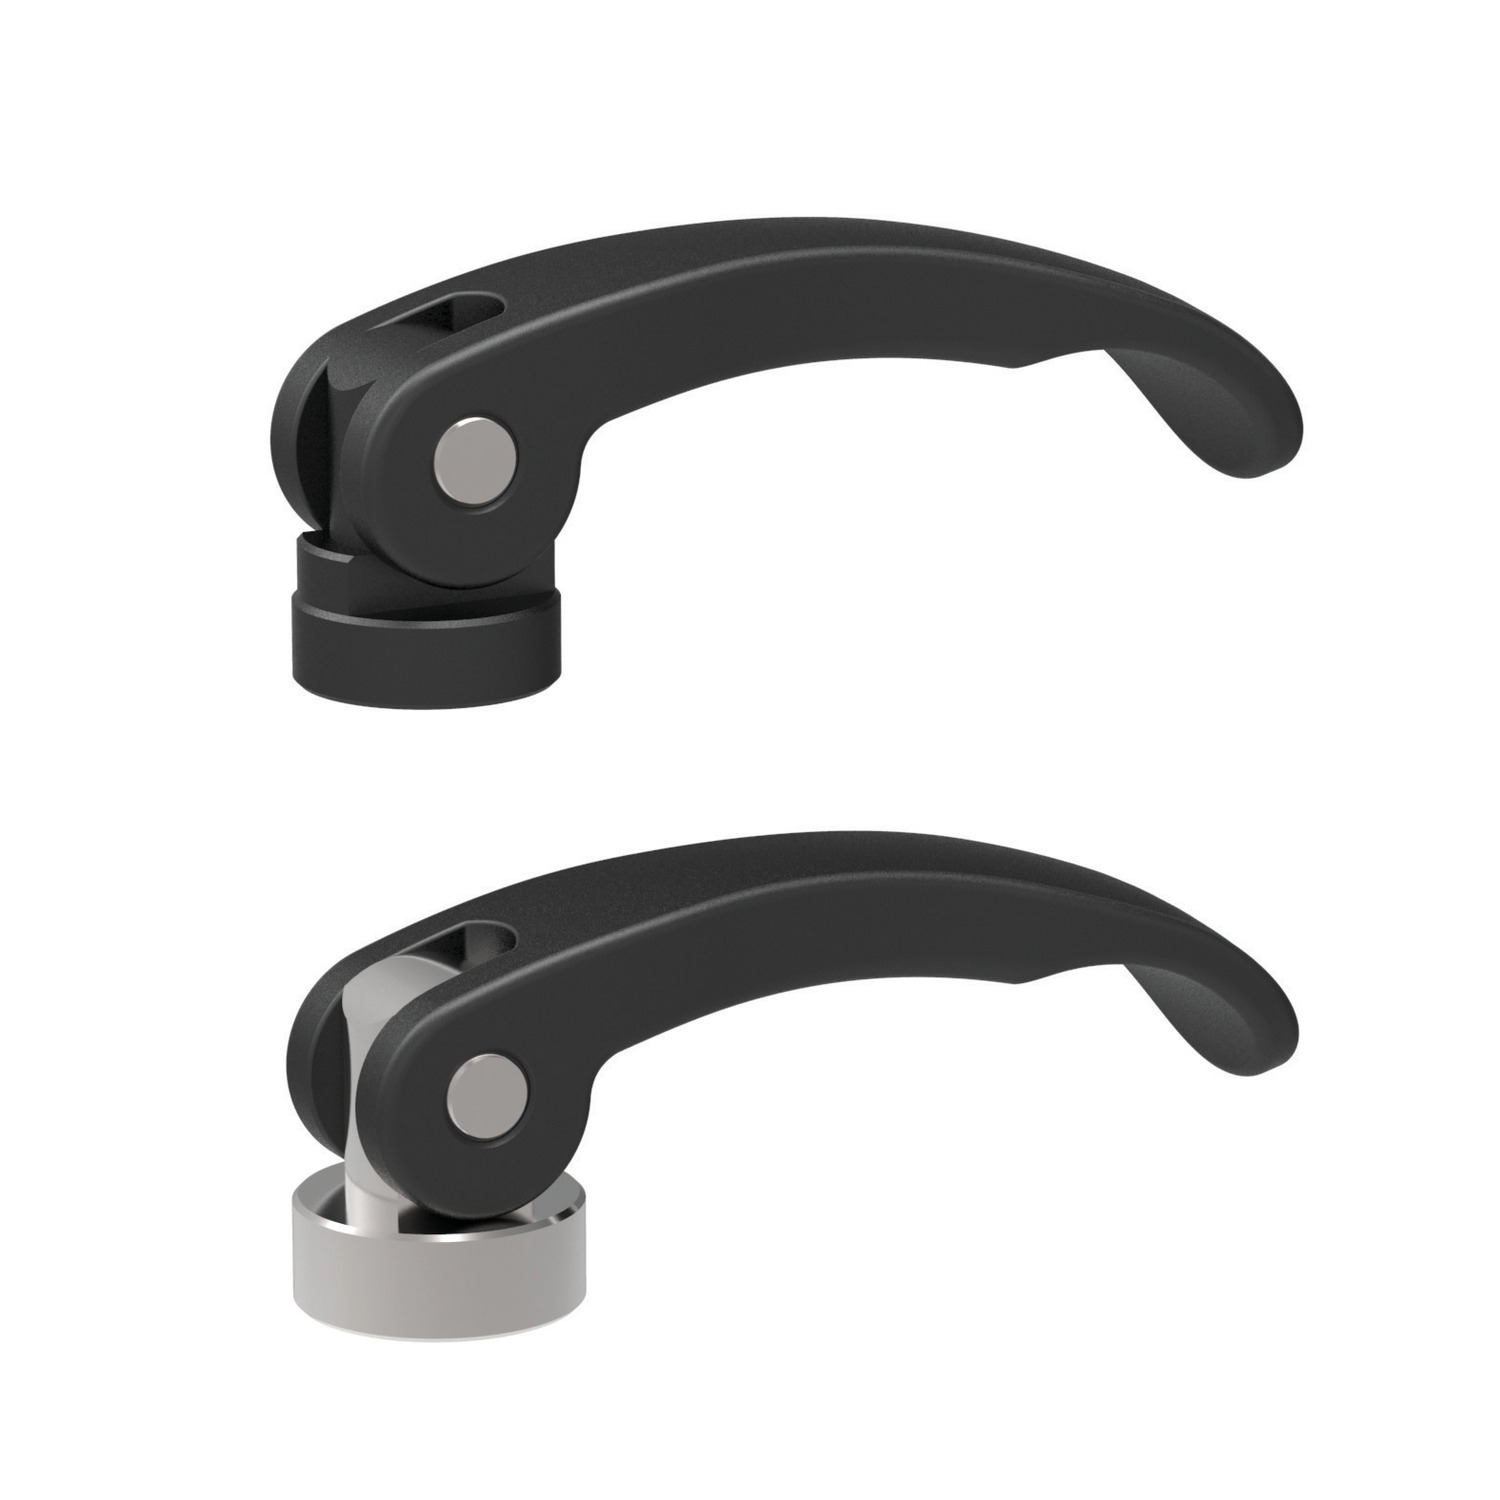 Cam Levers - Female Quick clamping eccentric levers made from zinc. Black plastic coated. Enable quick and easy clamping of work pieces.